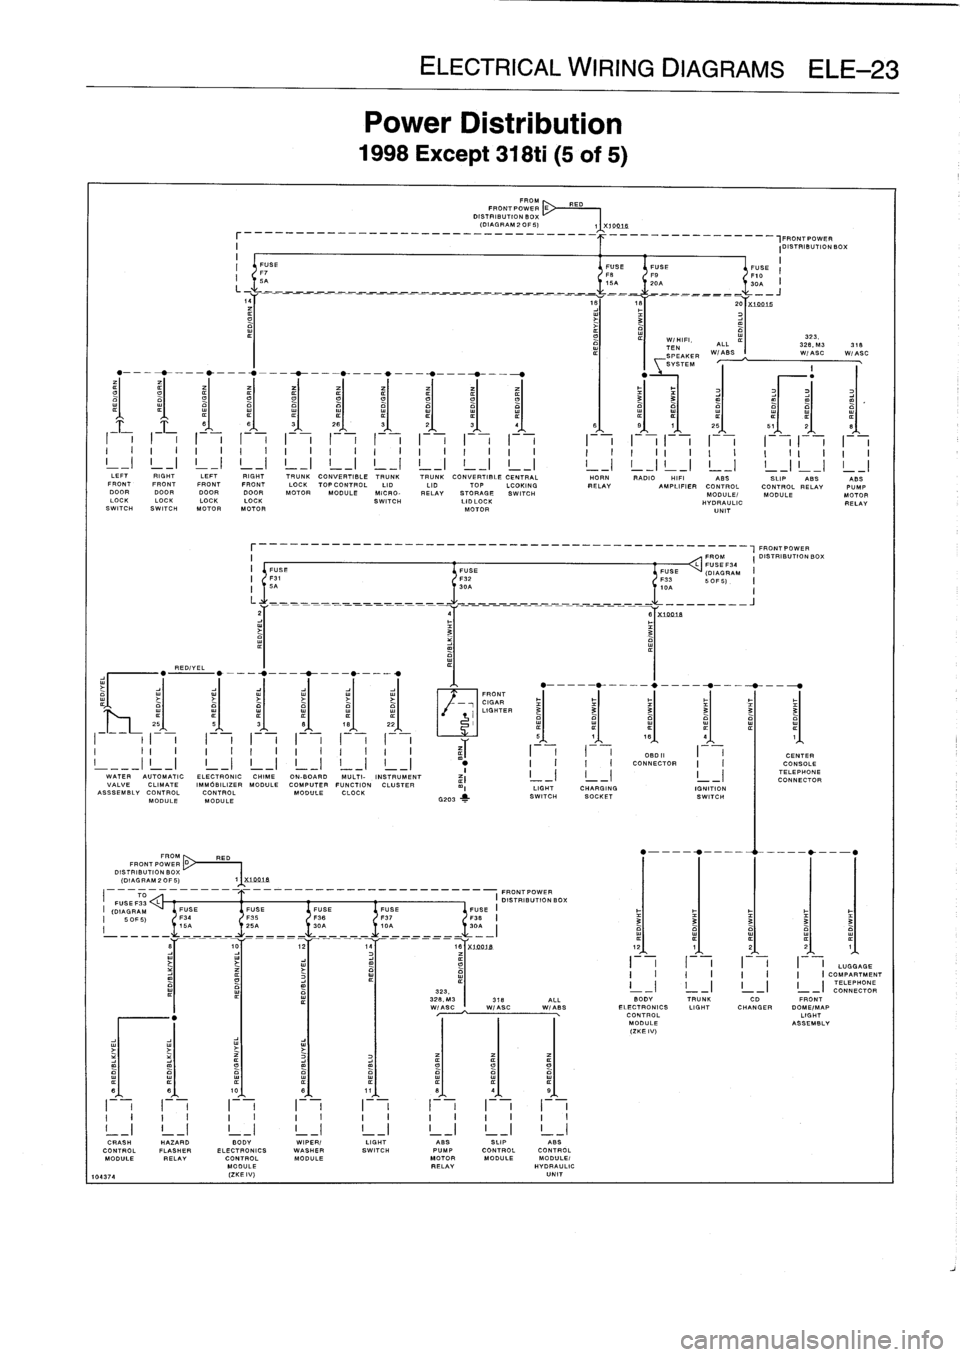 BMW 318i 1997 E36 User Guide 
REDIYEL

FROM
RED
FRONT
PO
WE
R
D~
DISTRIBUTION
BOX
(DIAGRAM
2
OF
5)

_
_
_
_
_
_
_
_
_
_
__
,FRONTPOWER
I

	

IDISTRIBUTIONBOX
I

	

II
FUSE

	

FUSEFUSE

	

FUSE
F7

	

FS

	

FO

	

F10
I
I
5A

	
